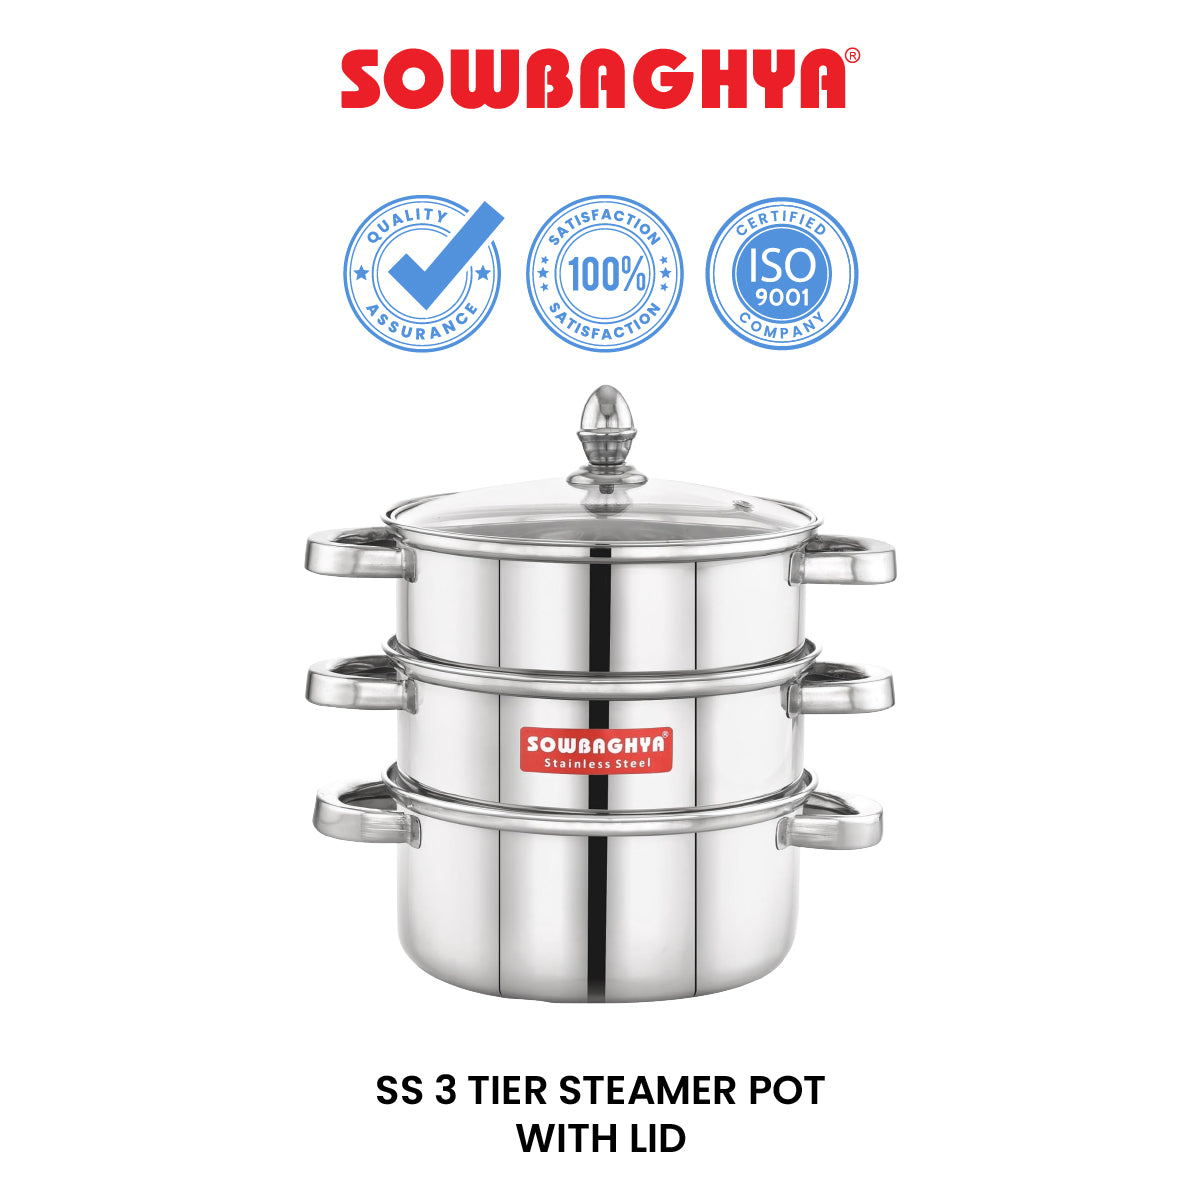 SS 3 Tier Streamer Pot with Lid